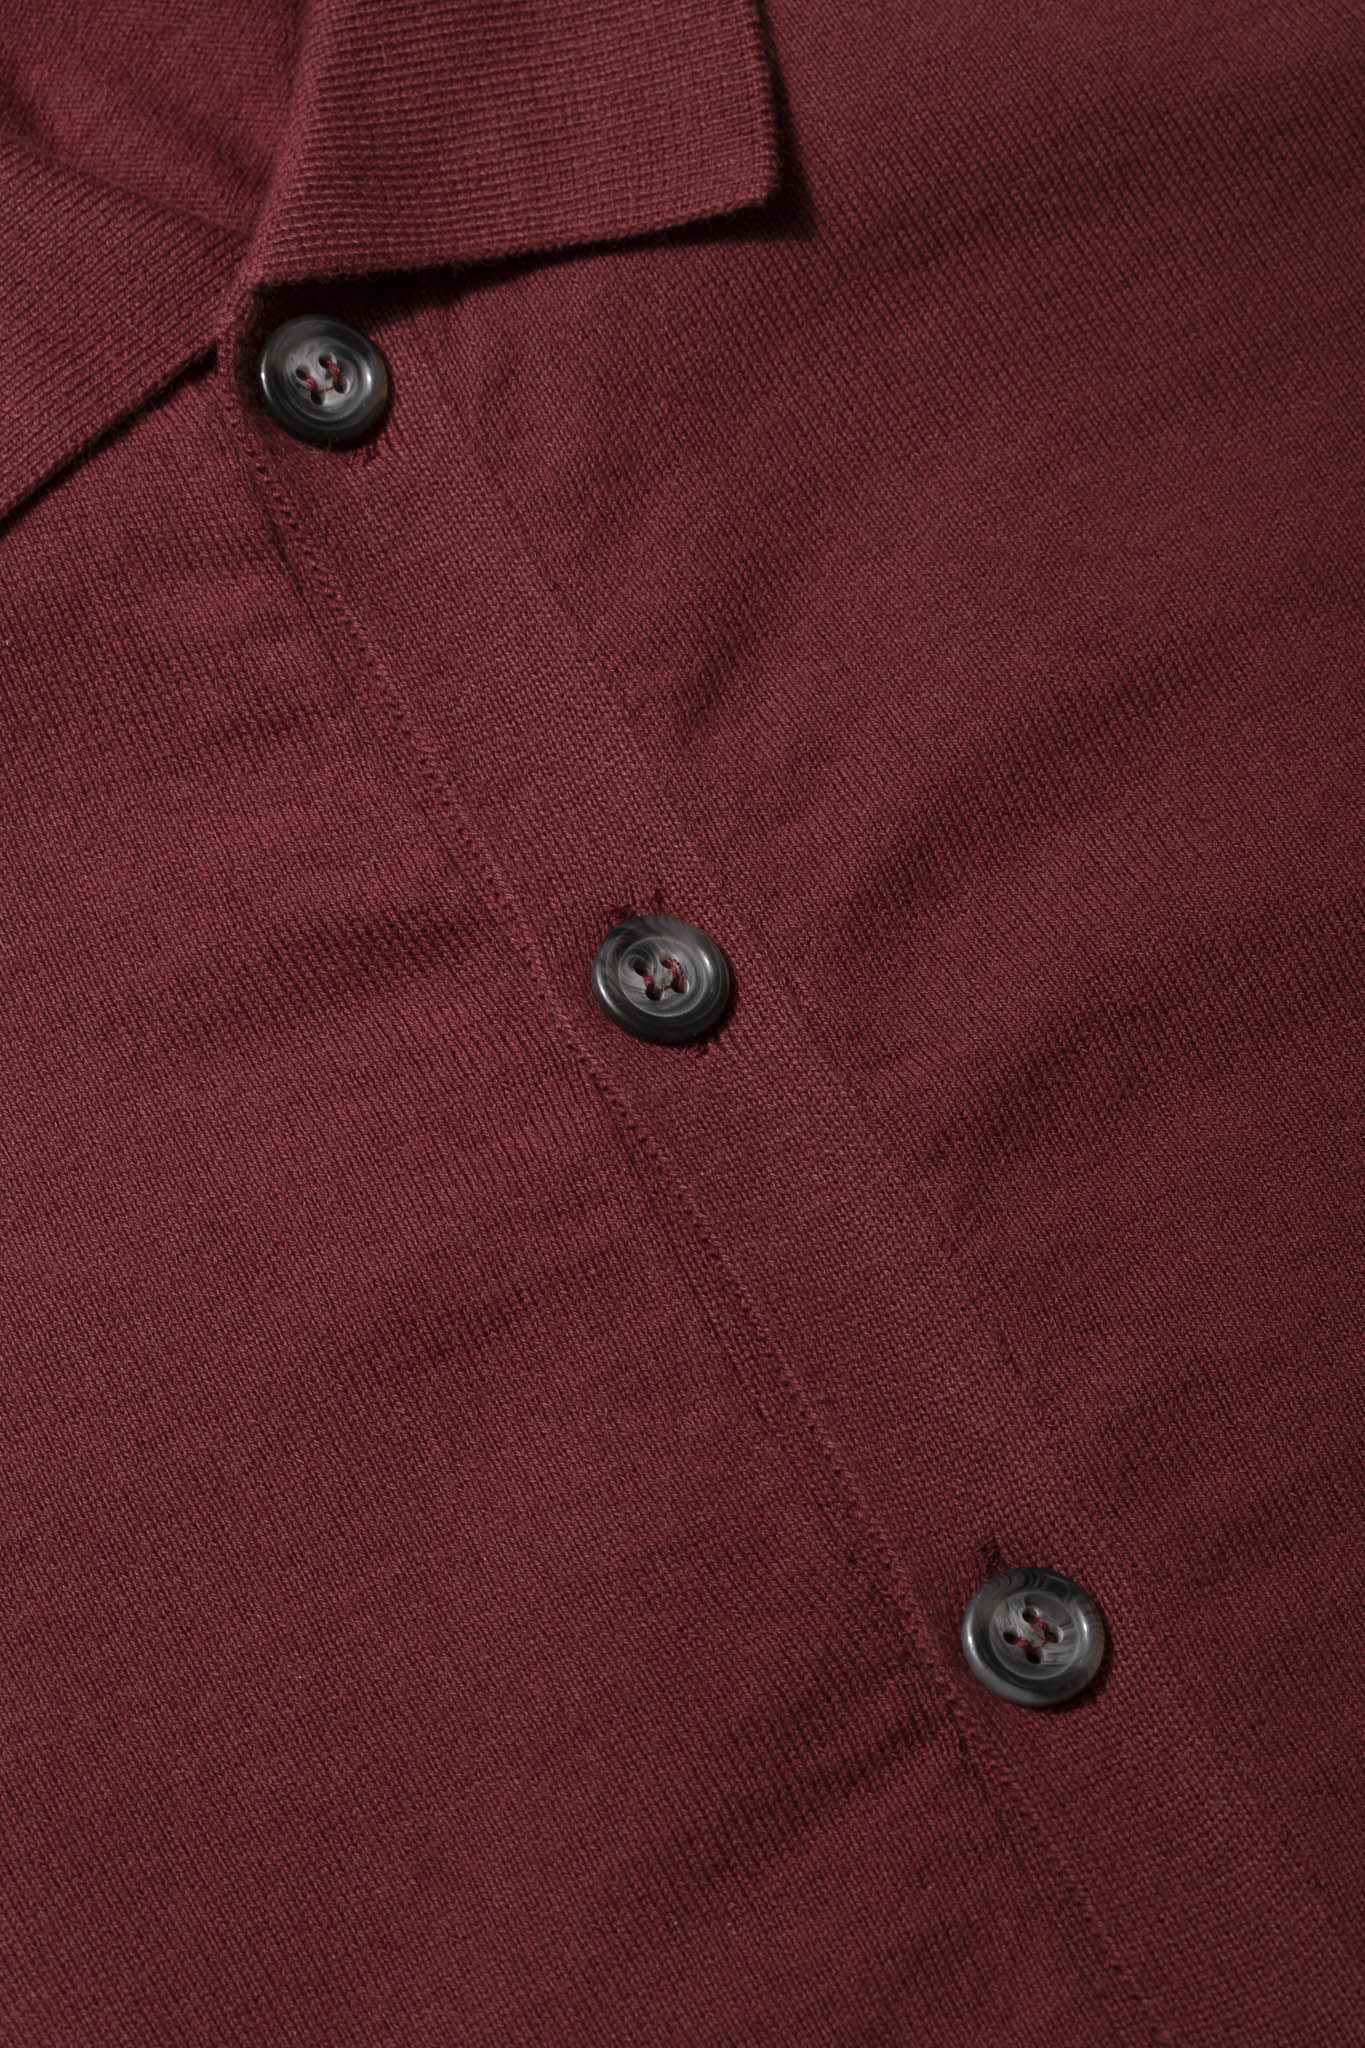 Bordeaux cotton cardigan - Made in Italy